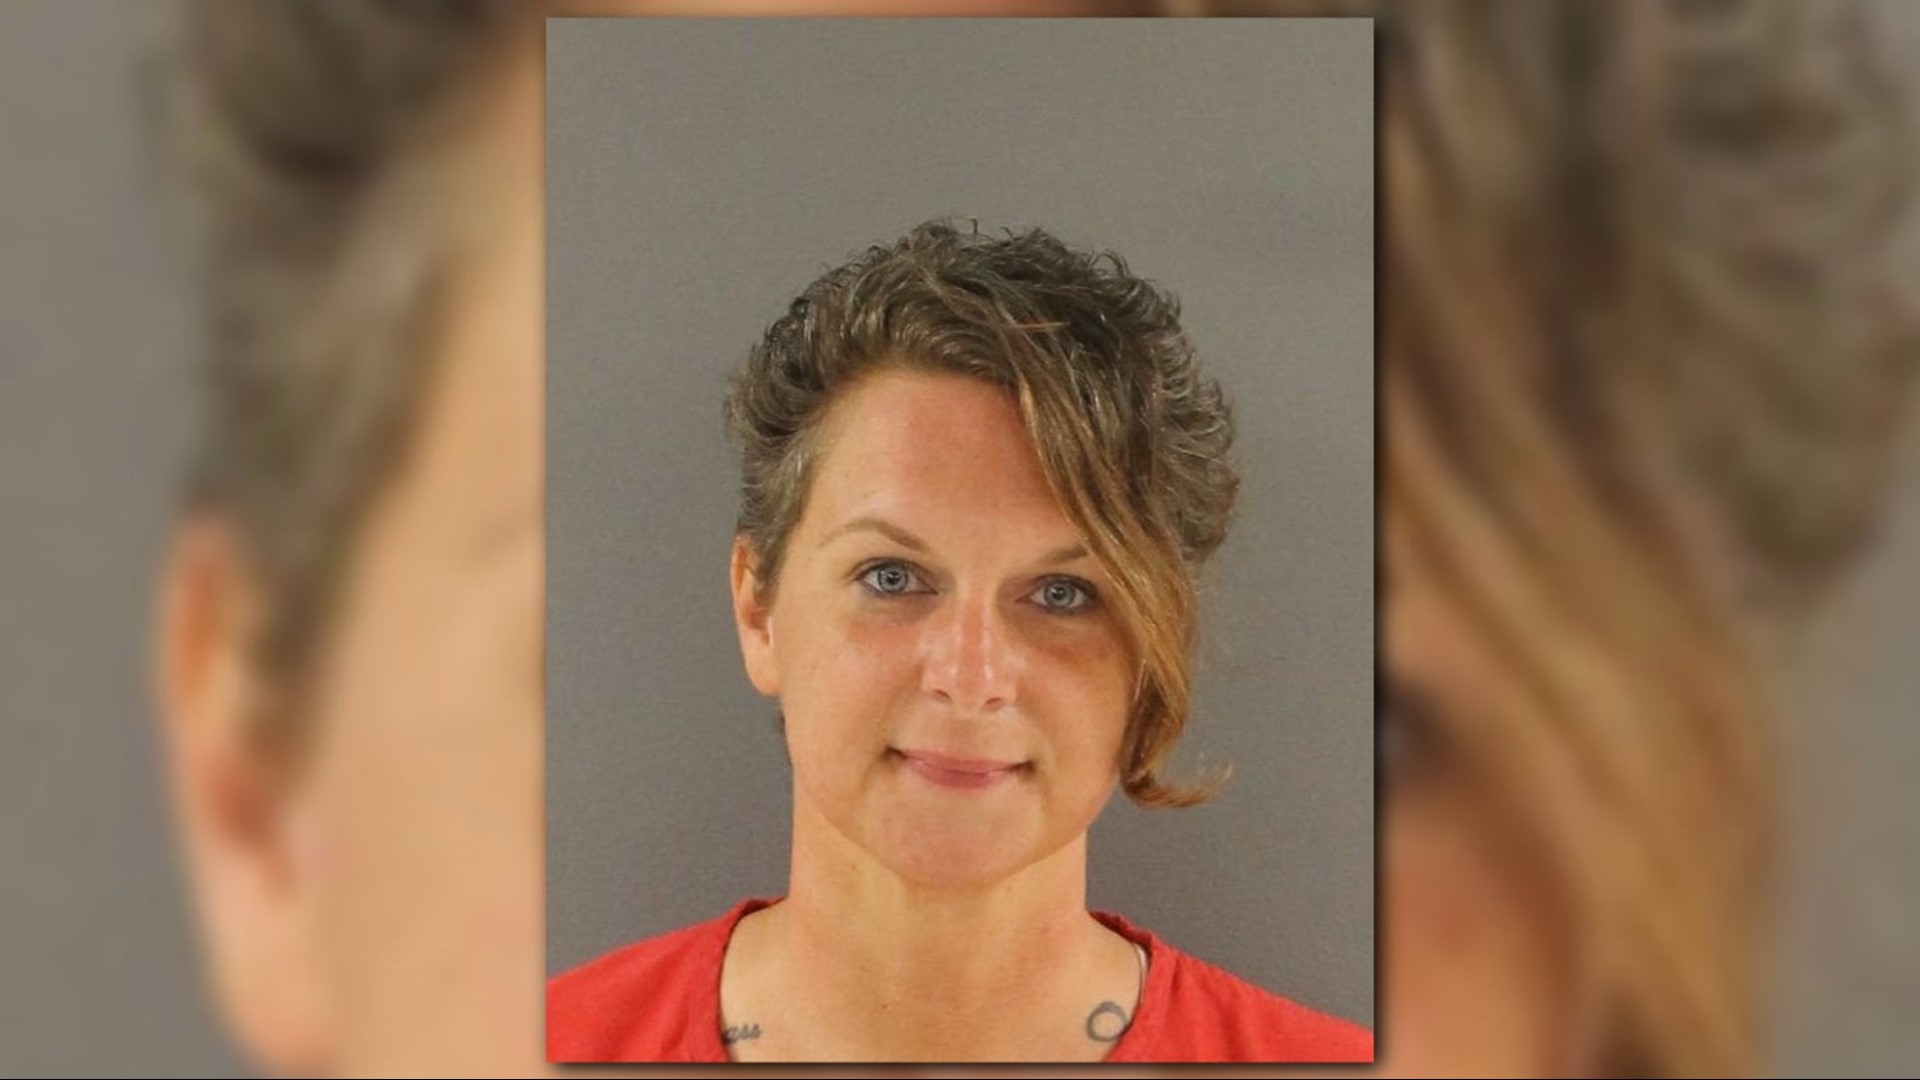 Da Woman Confessed To Breaking Into Neighbors Home On Facebook 